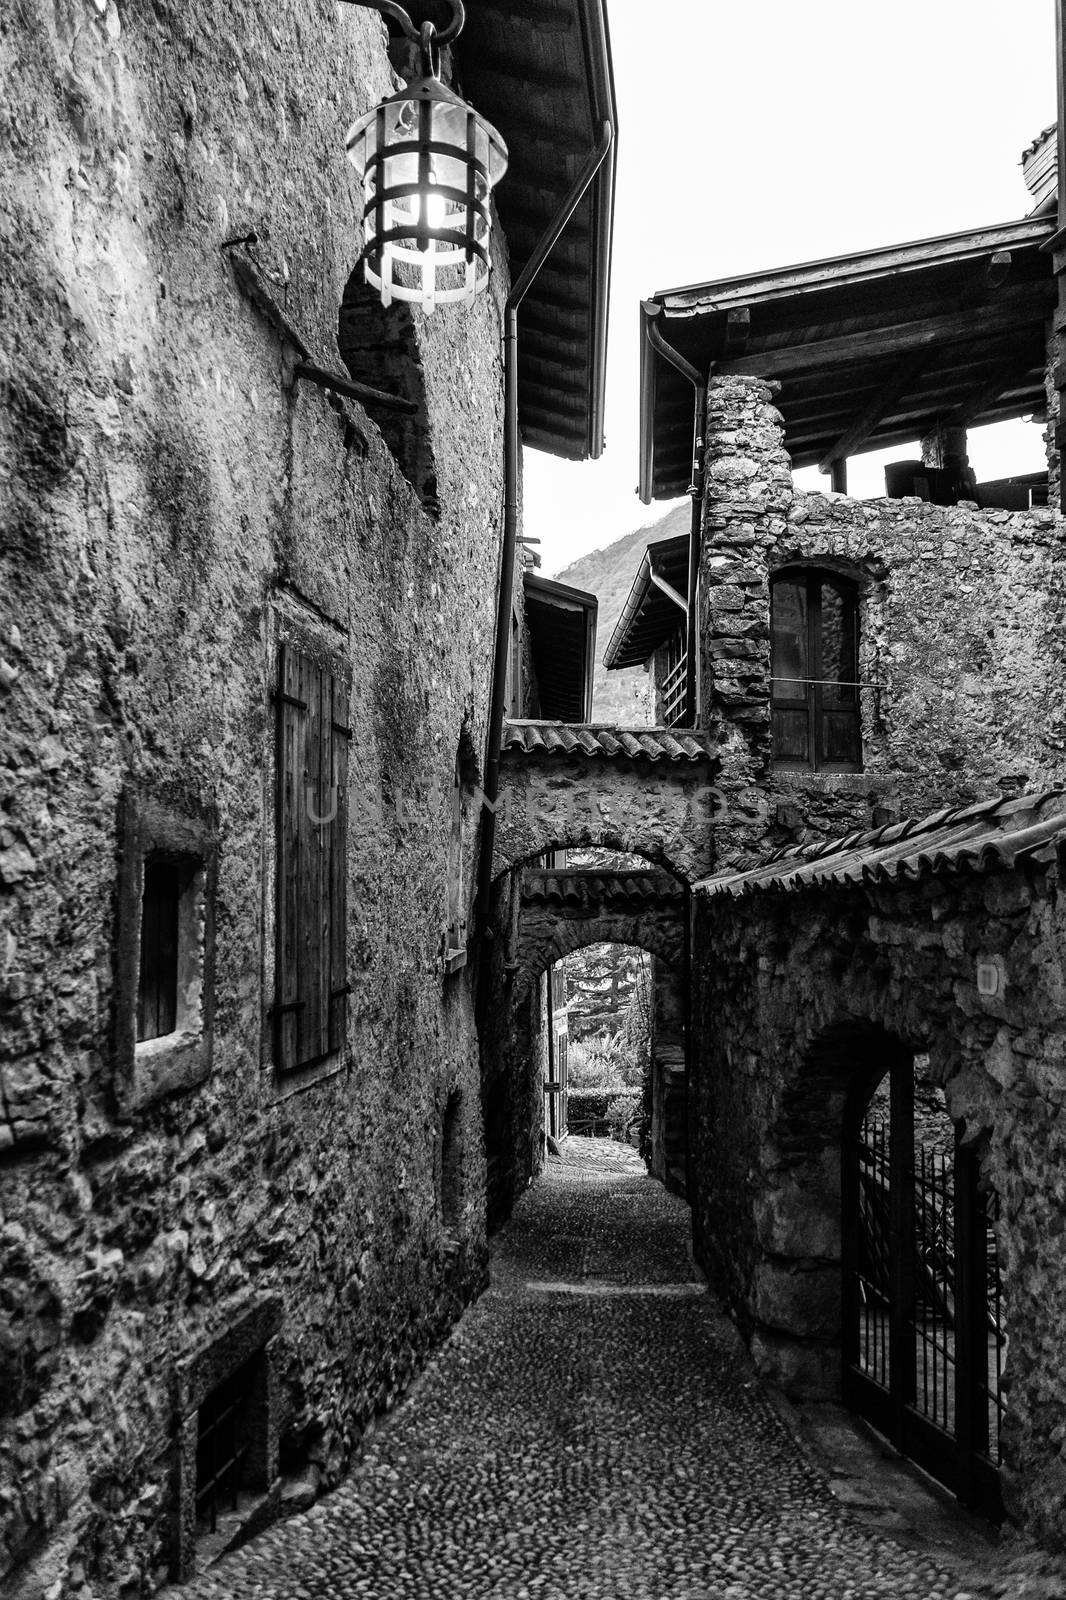 Narrow alley in a medieval village in Italy. by Isaac74